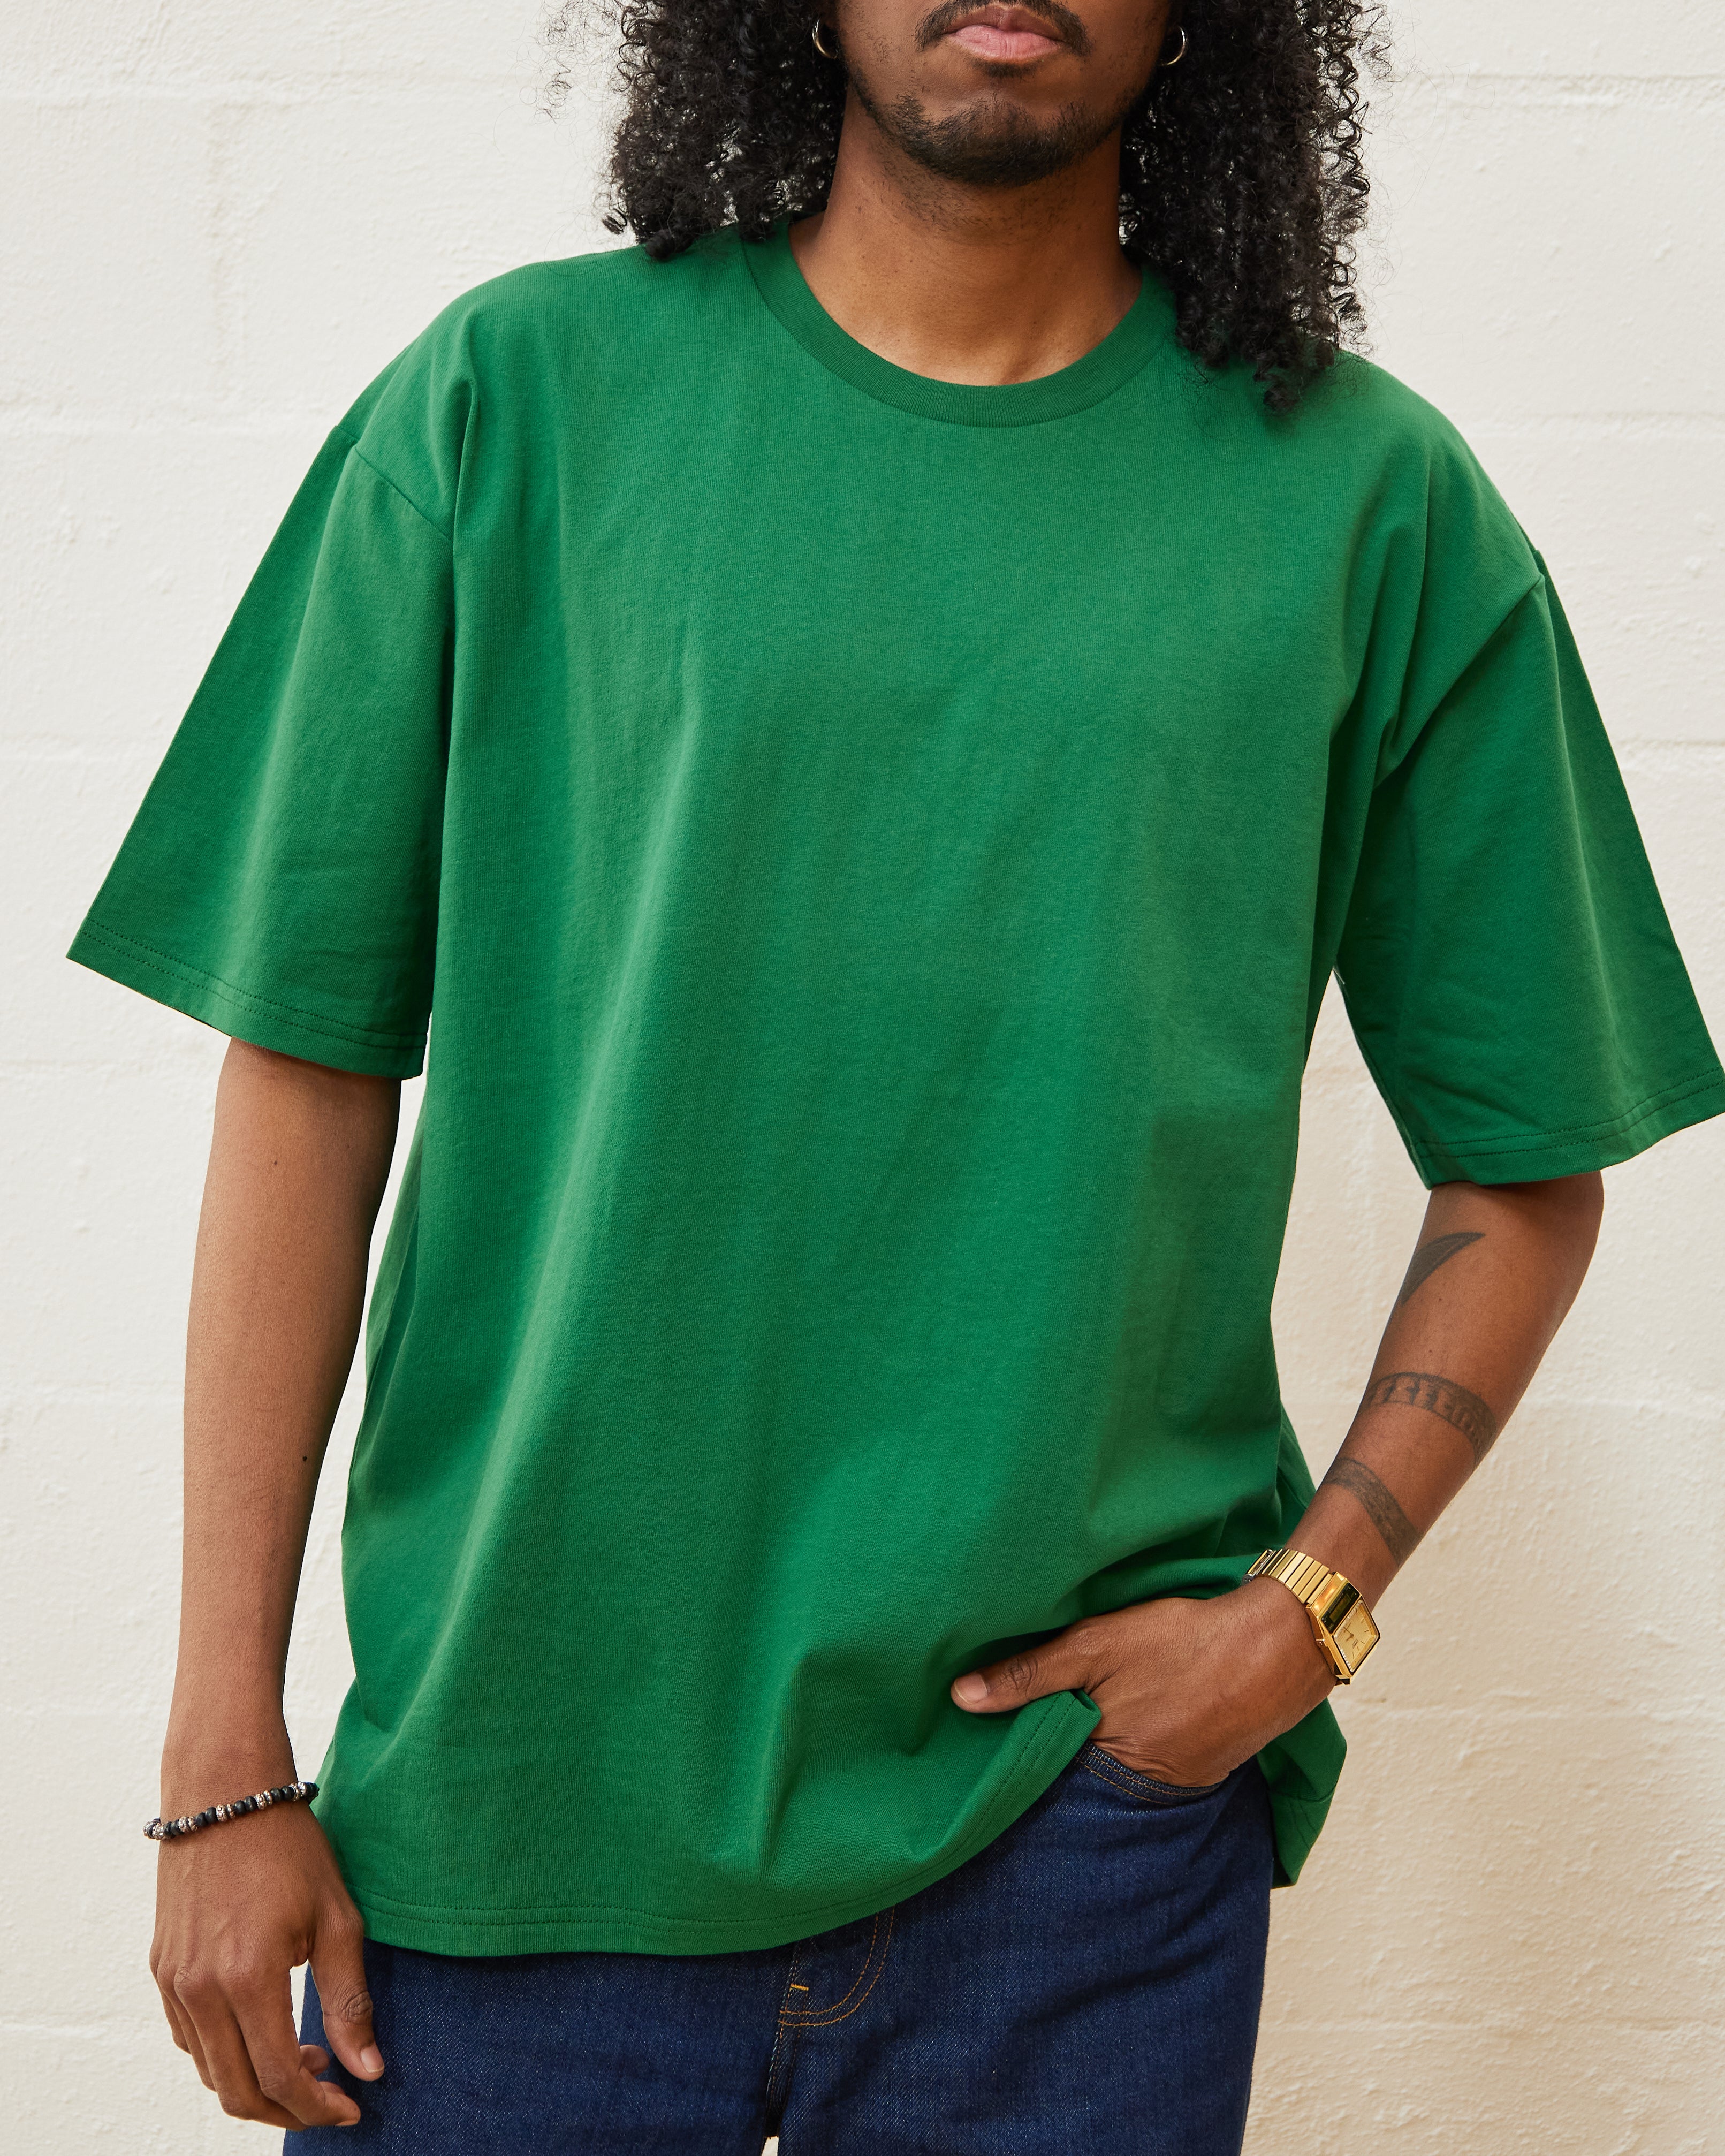 Classic Tee 8 Pack: Brown, Charcoal, Green, Navy